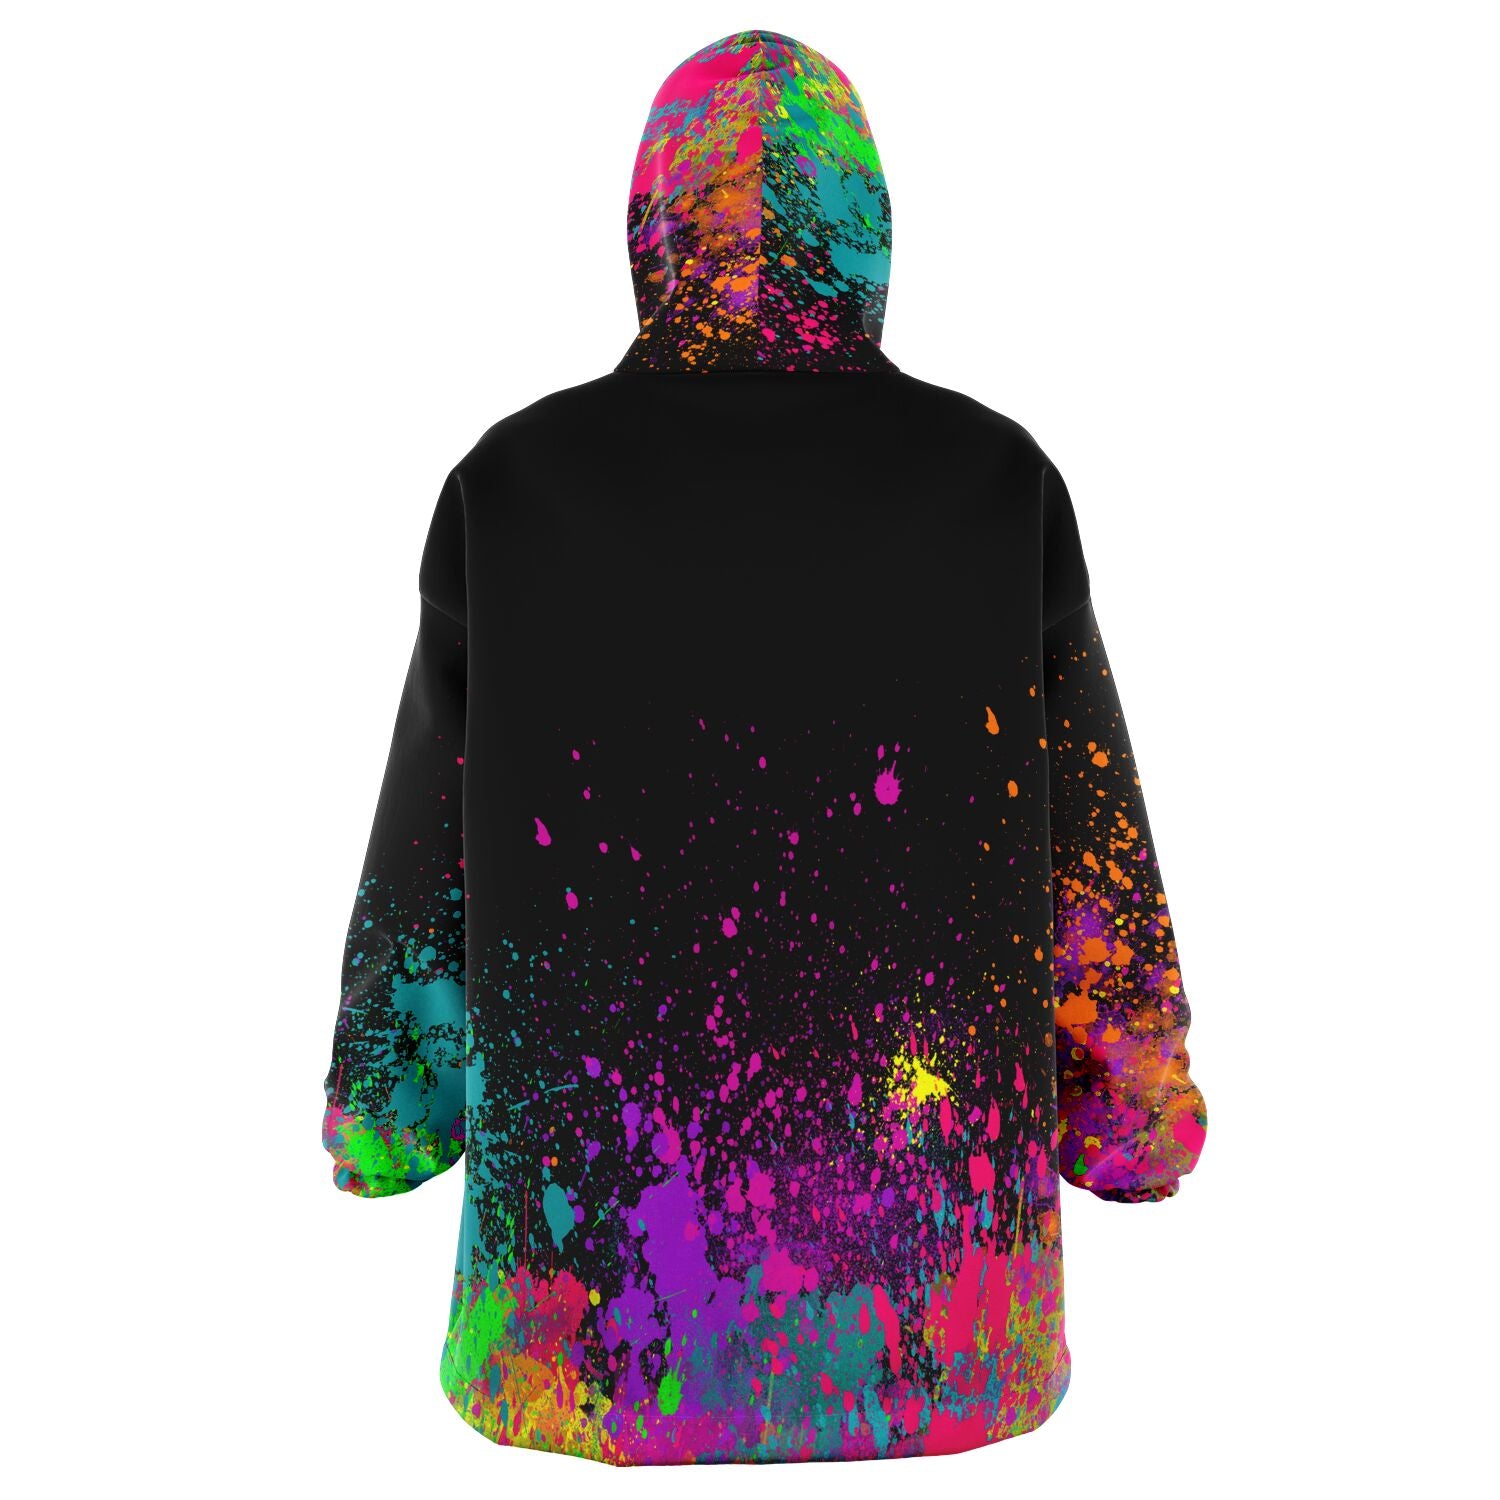 Oversized hoodie for artists and face painters